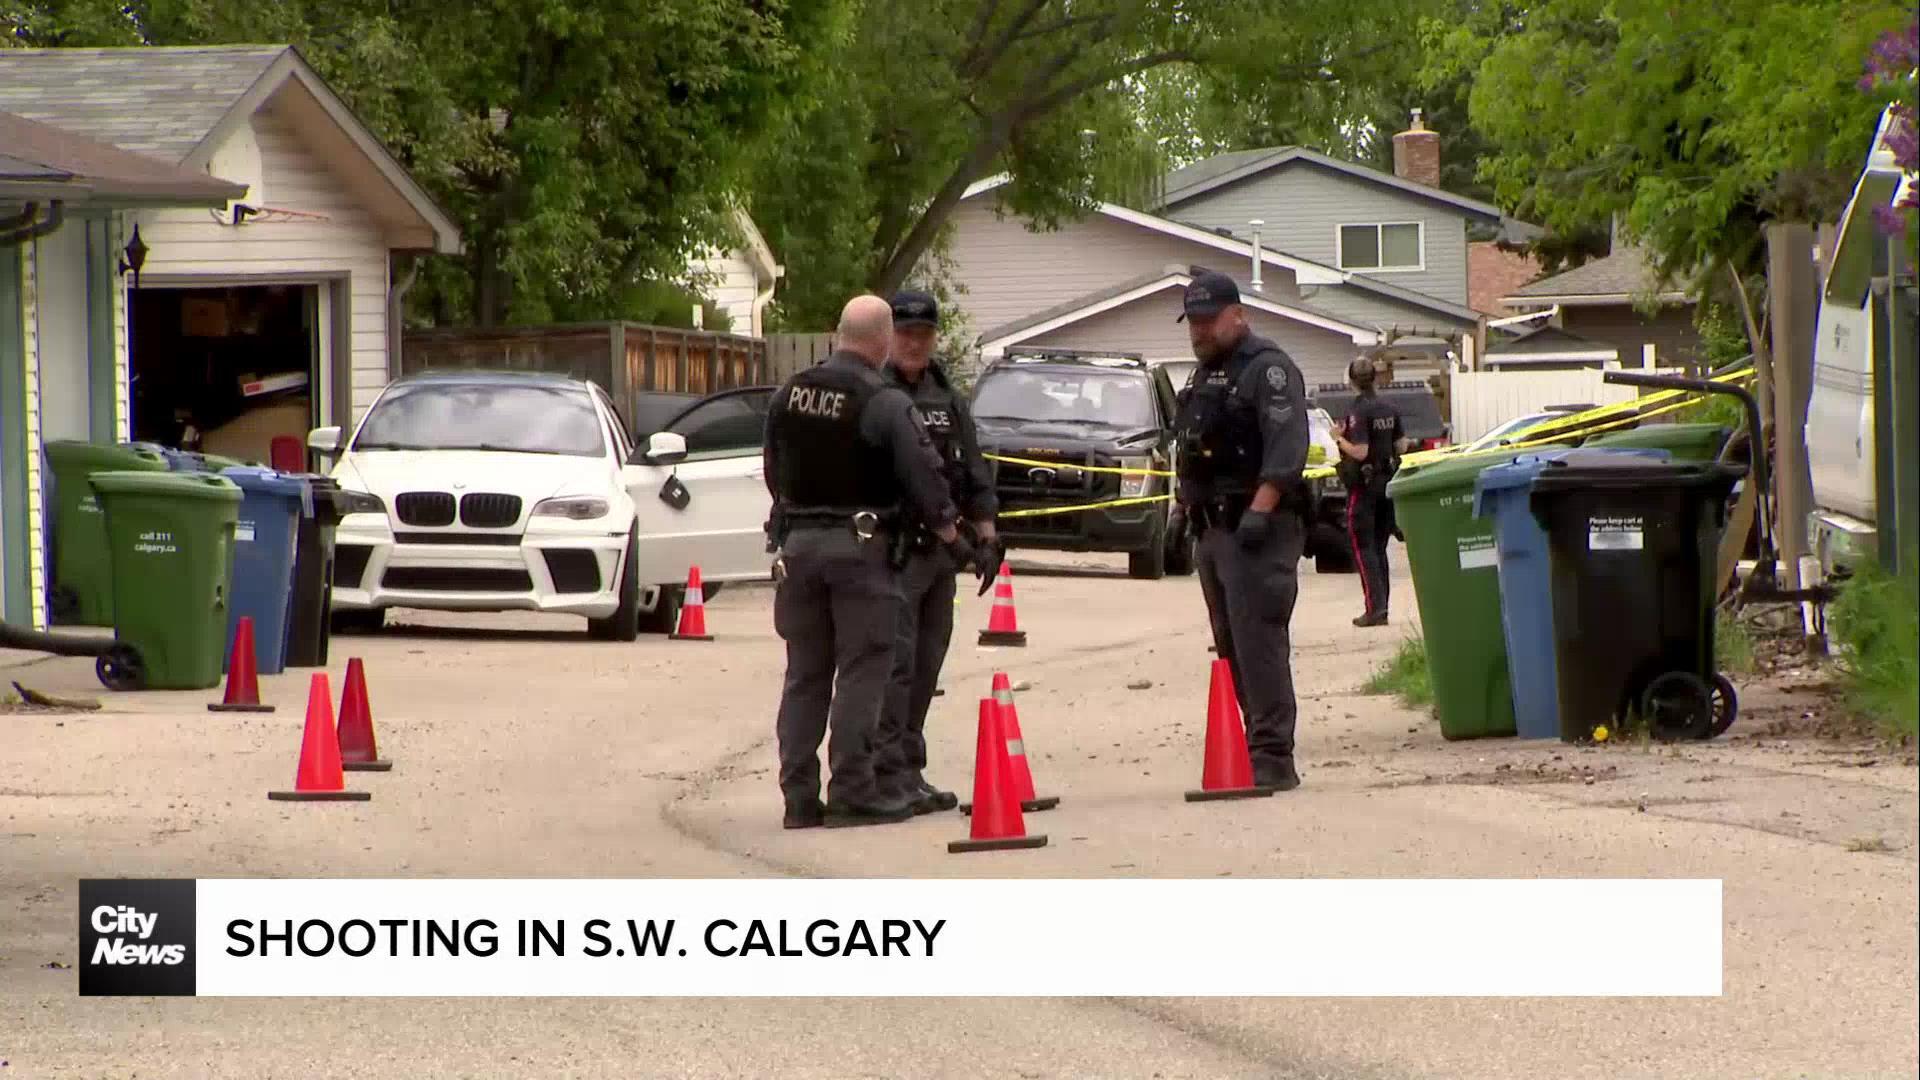 Daylight shooting in S.W. Calgary sends man to hospital